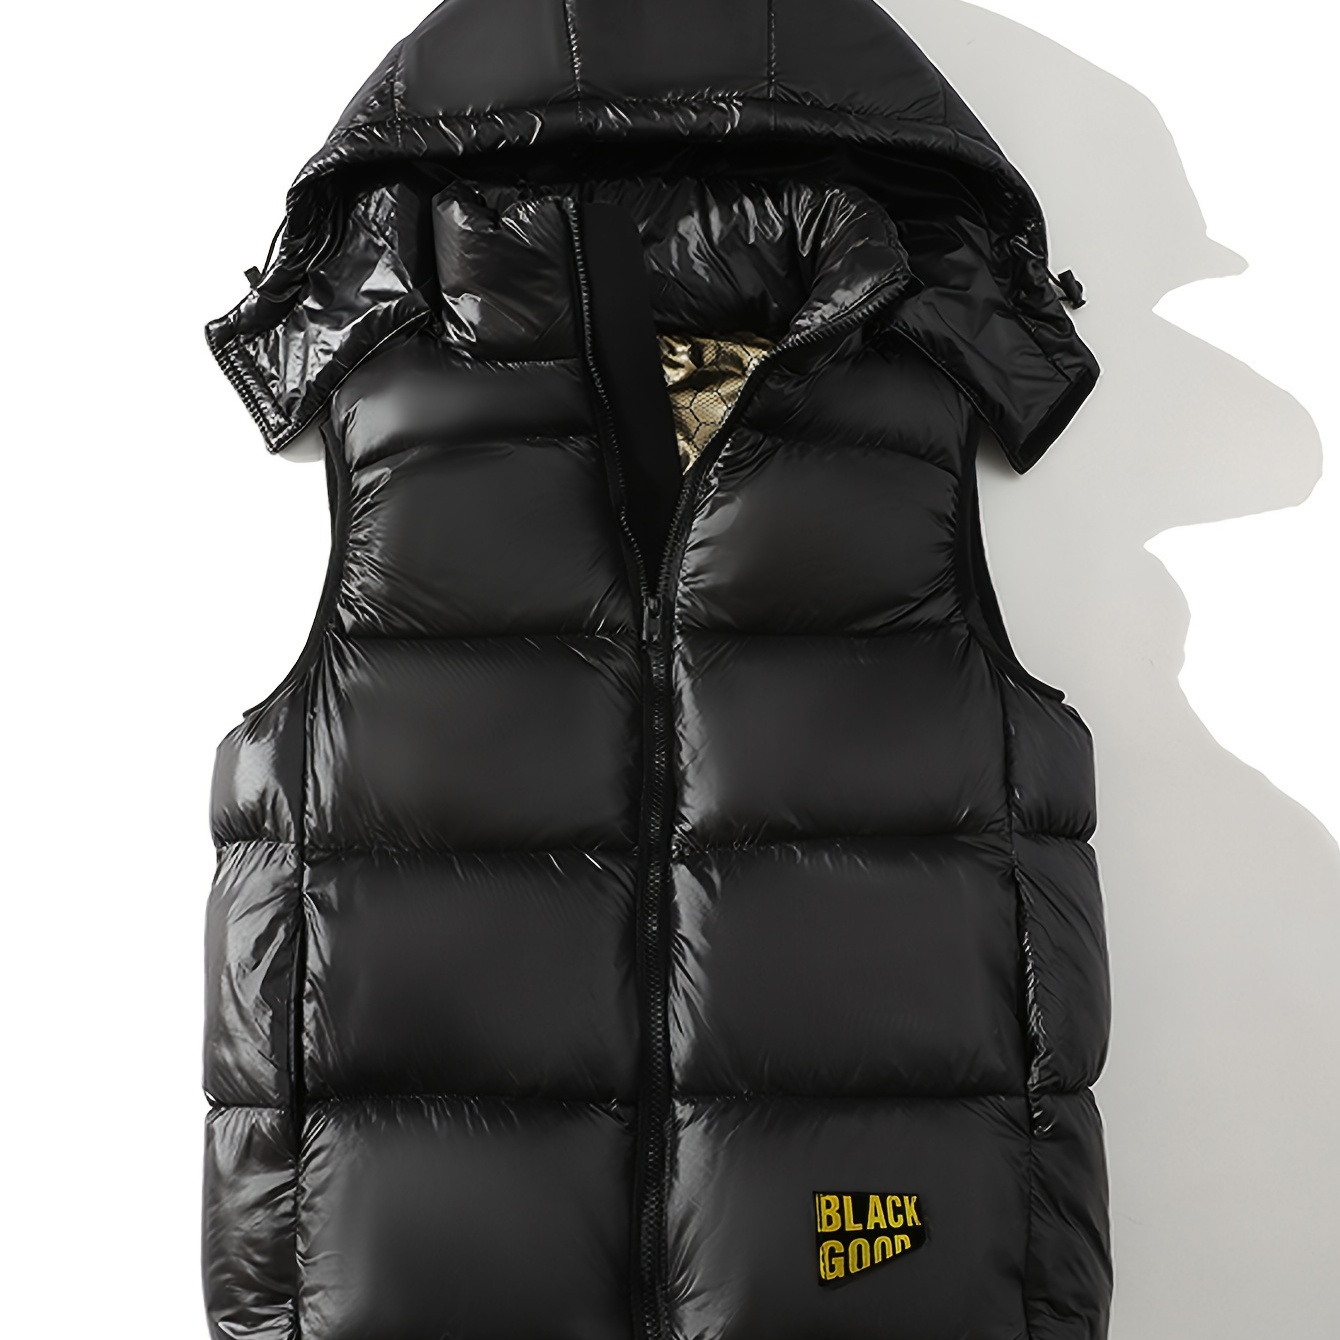 

Men's Stylish Solid Sleeveless Puffer Coat With Pockets, Casual Breathable Zip Up Warm Hooded Tank Top For City Walk Street Hanging Winter Outdoor Activities